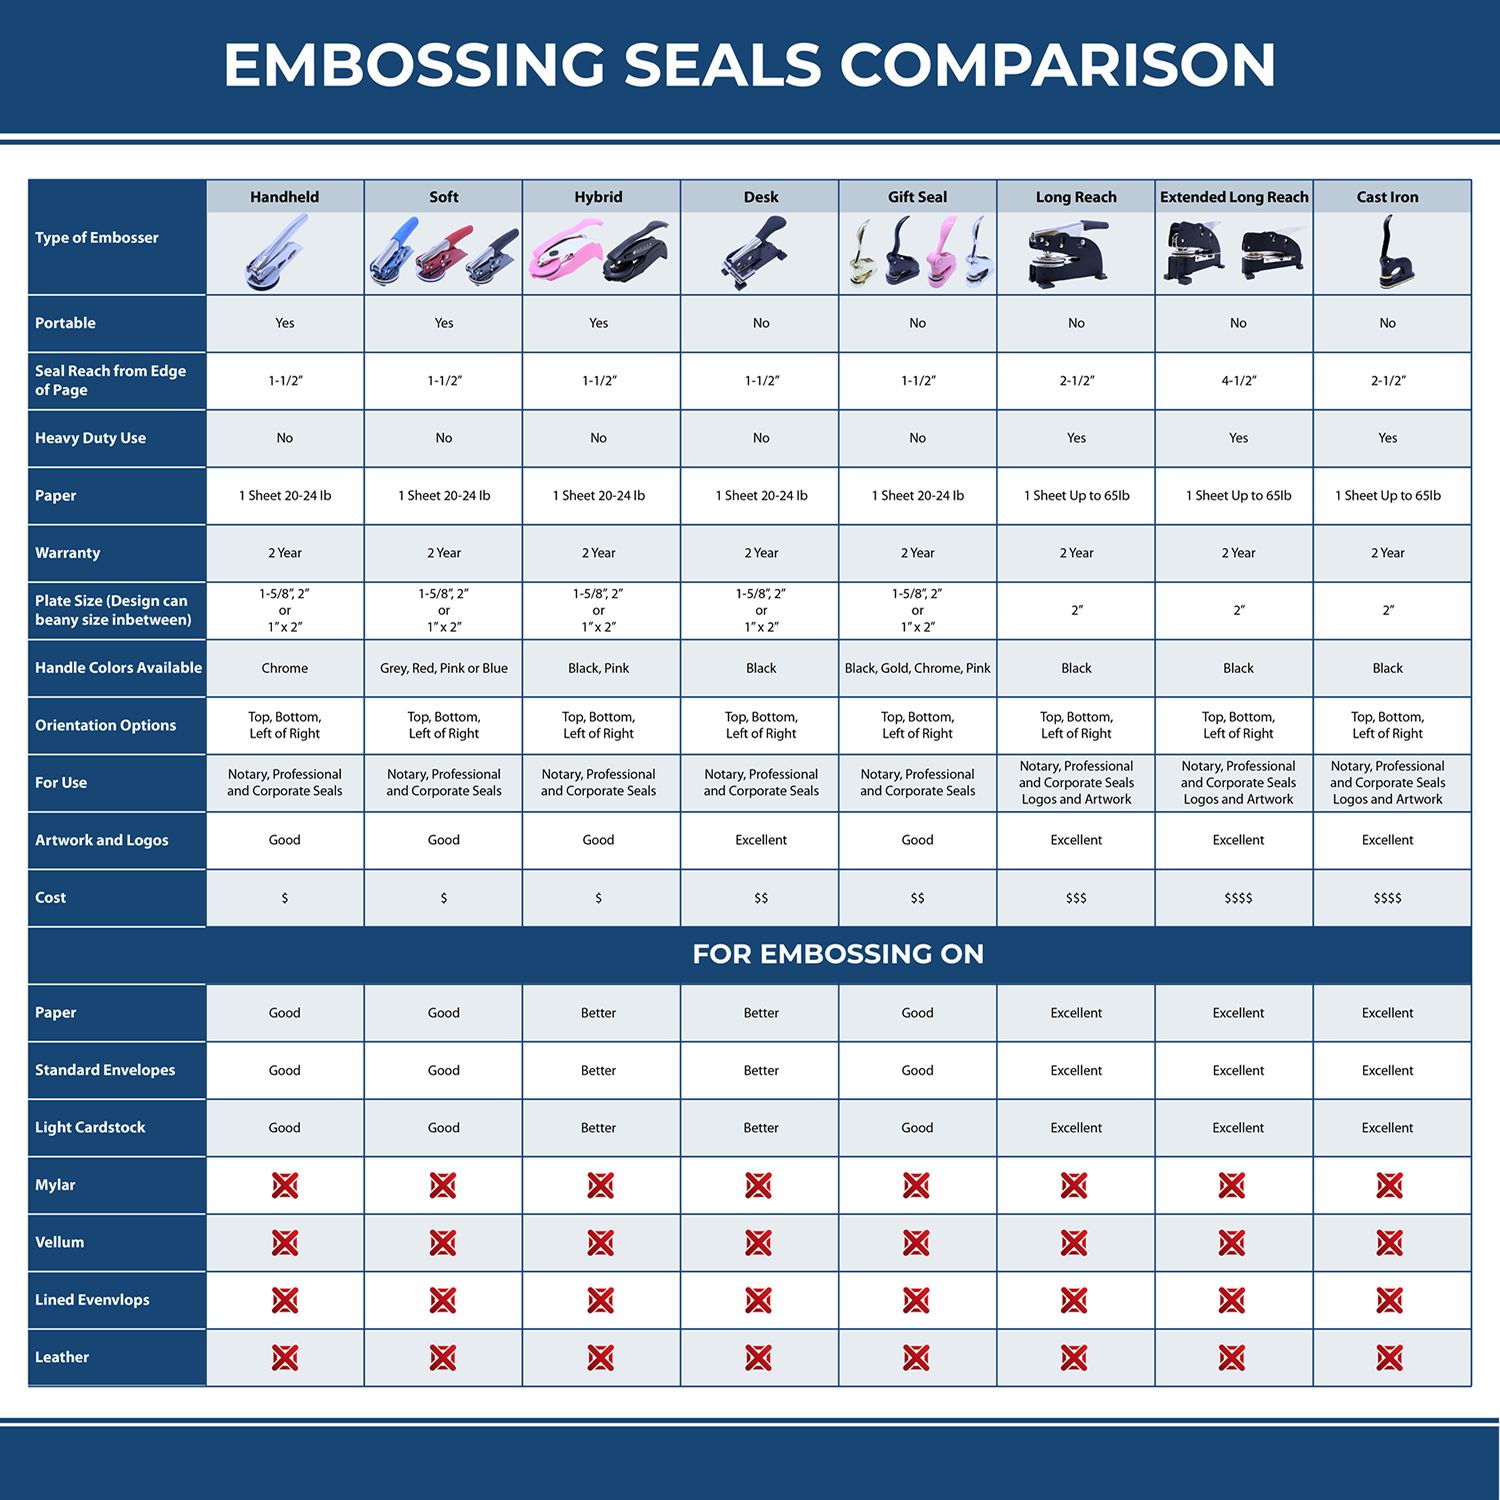 A comparison chart for the different types of mount models available for the Heavy Duty Cast Iron Virginia Land Surveyor Seal Embosser.